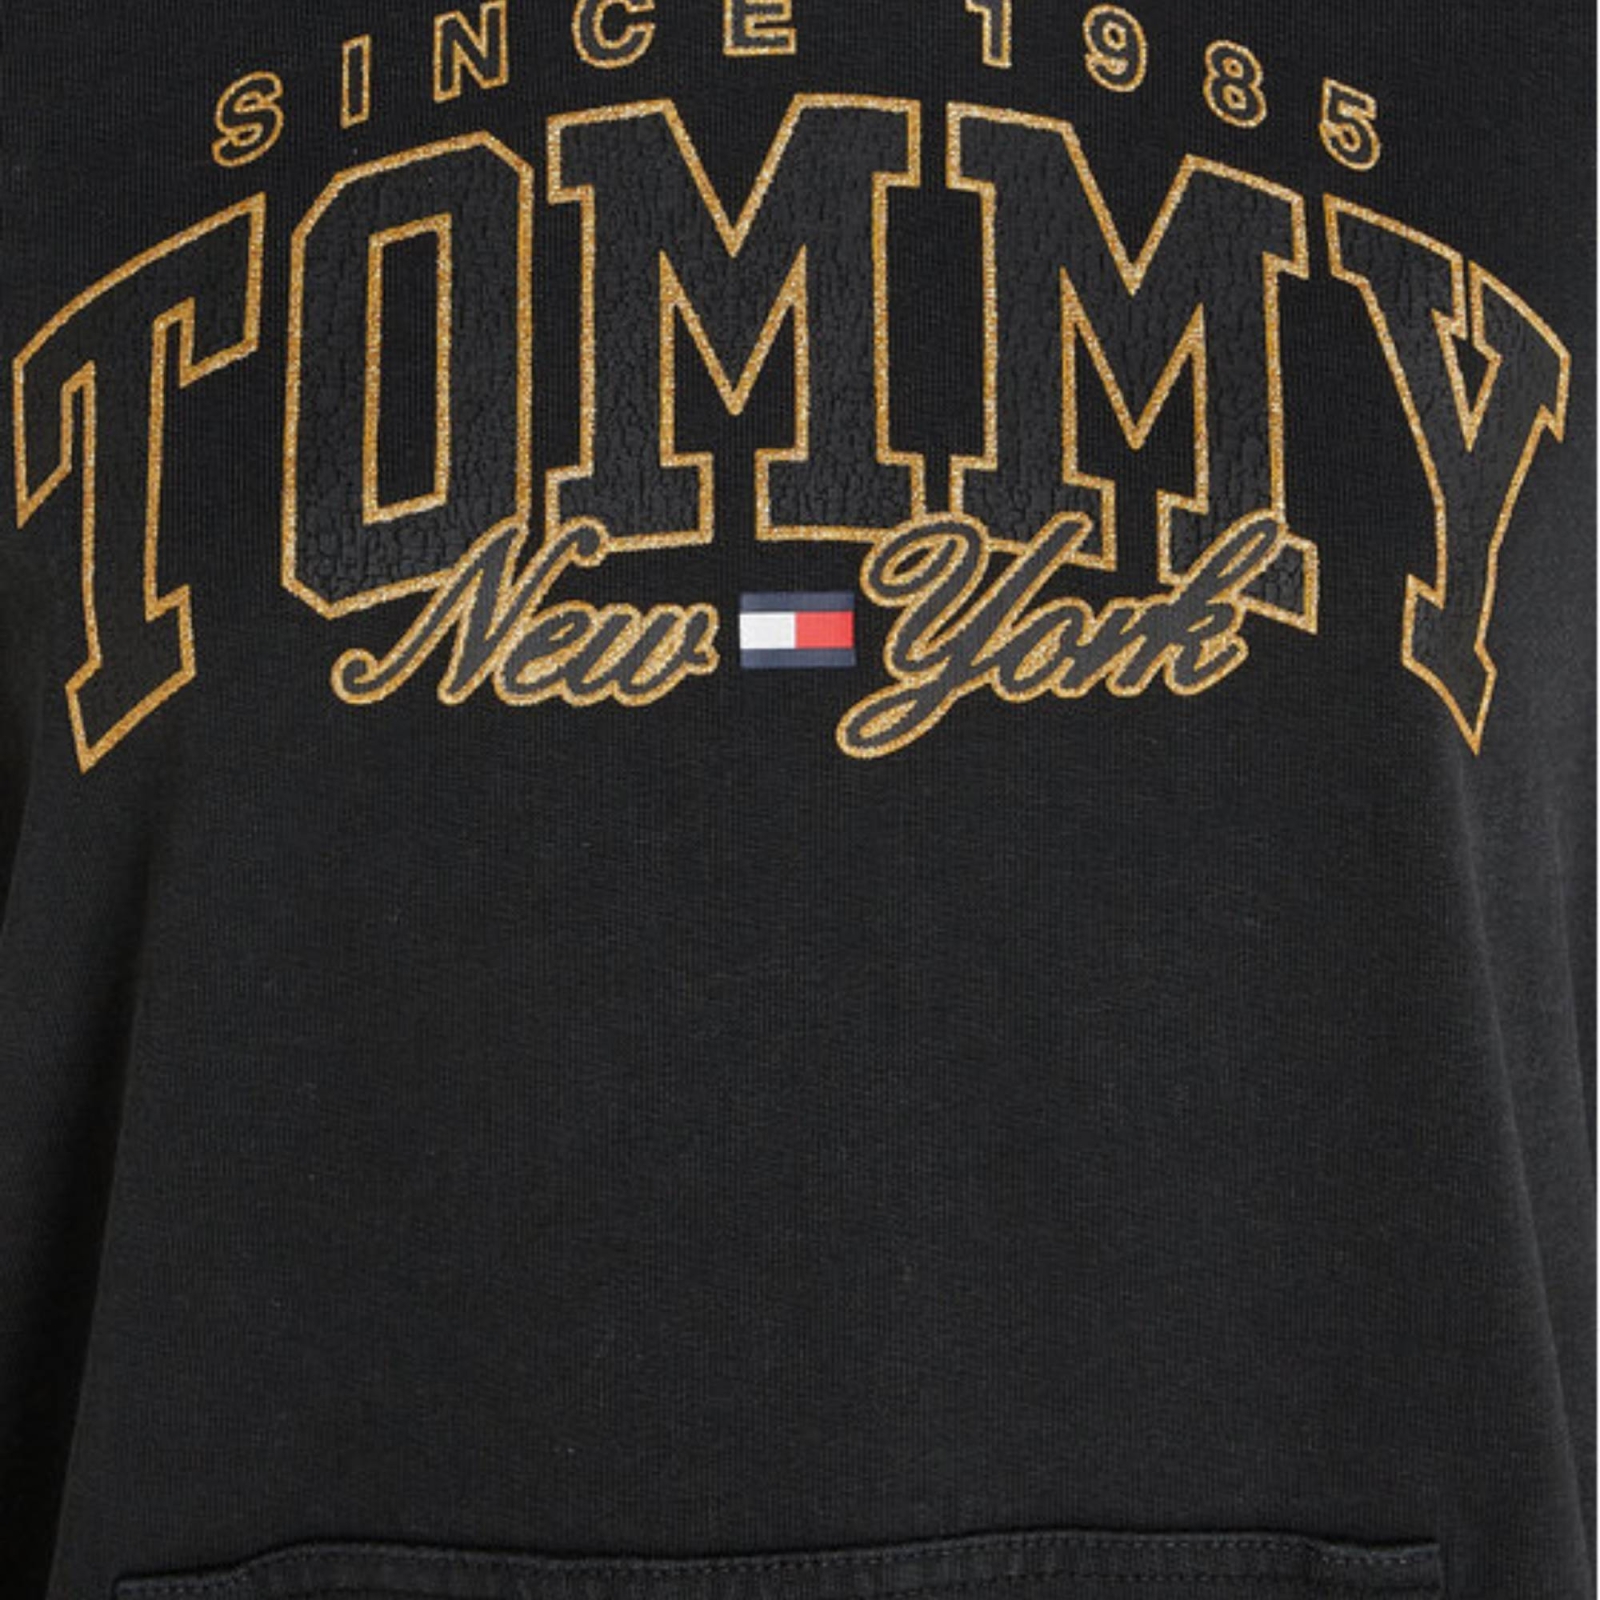 TOMMY JEANS WOMENS RELAXED LUXE VARSITY HOODIE